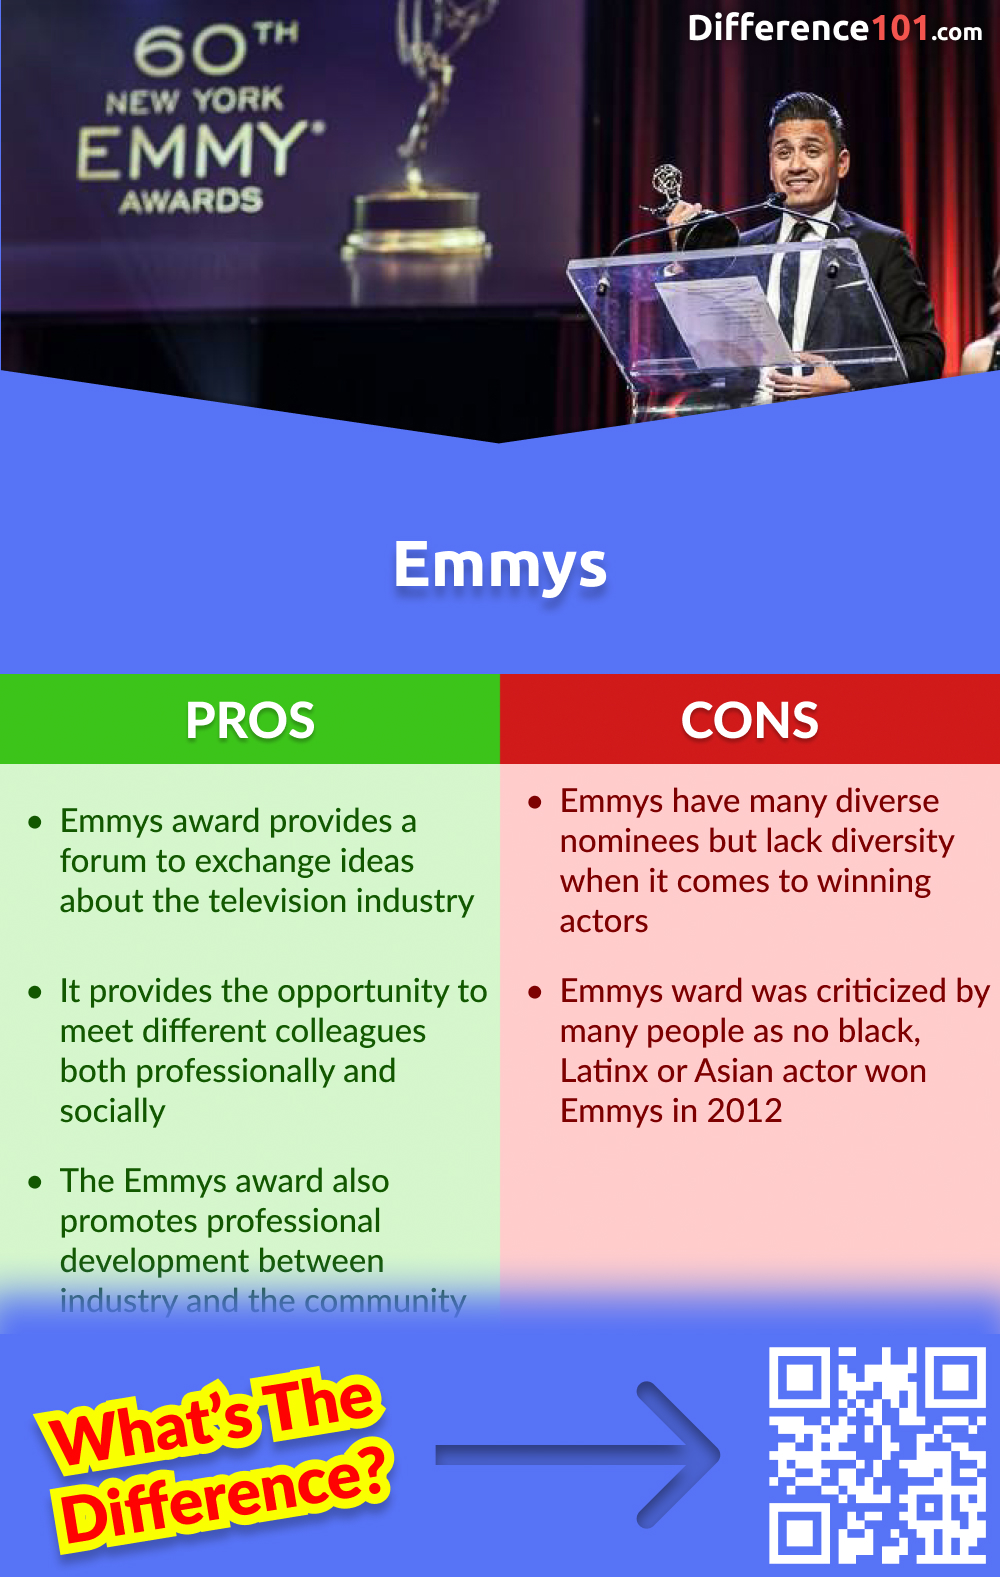 Emmys Pros and Cons